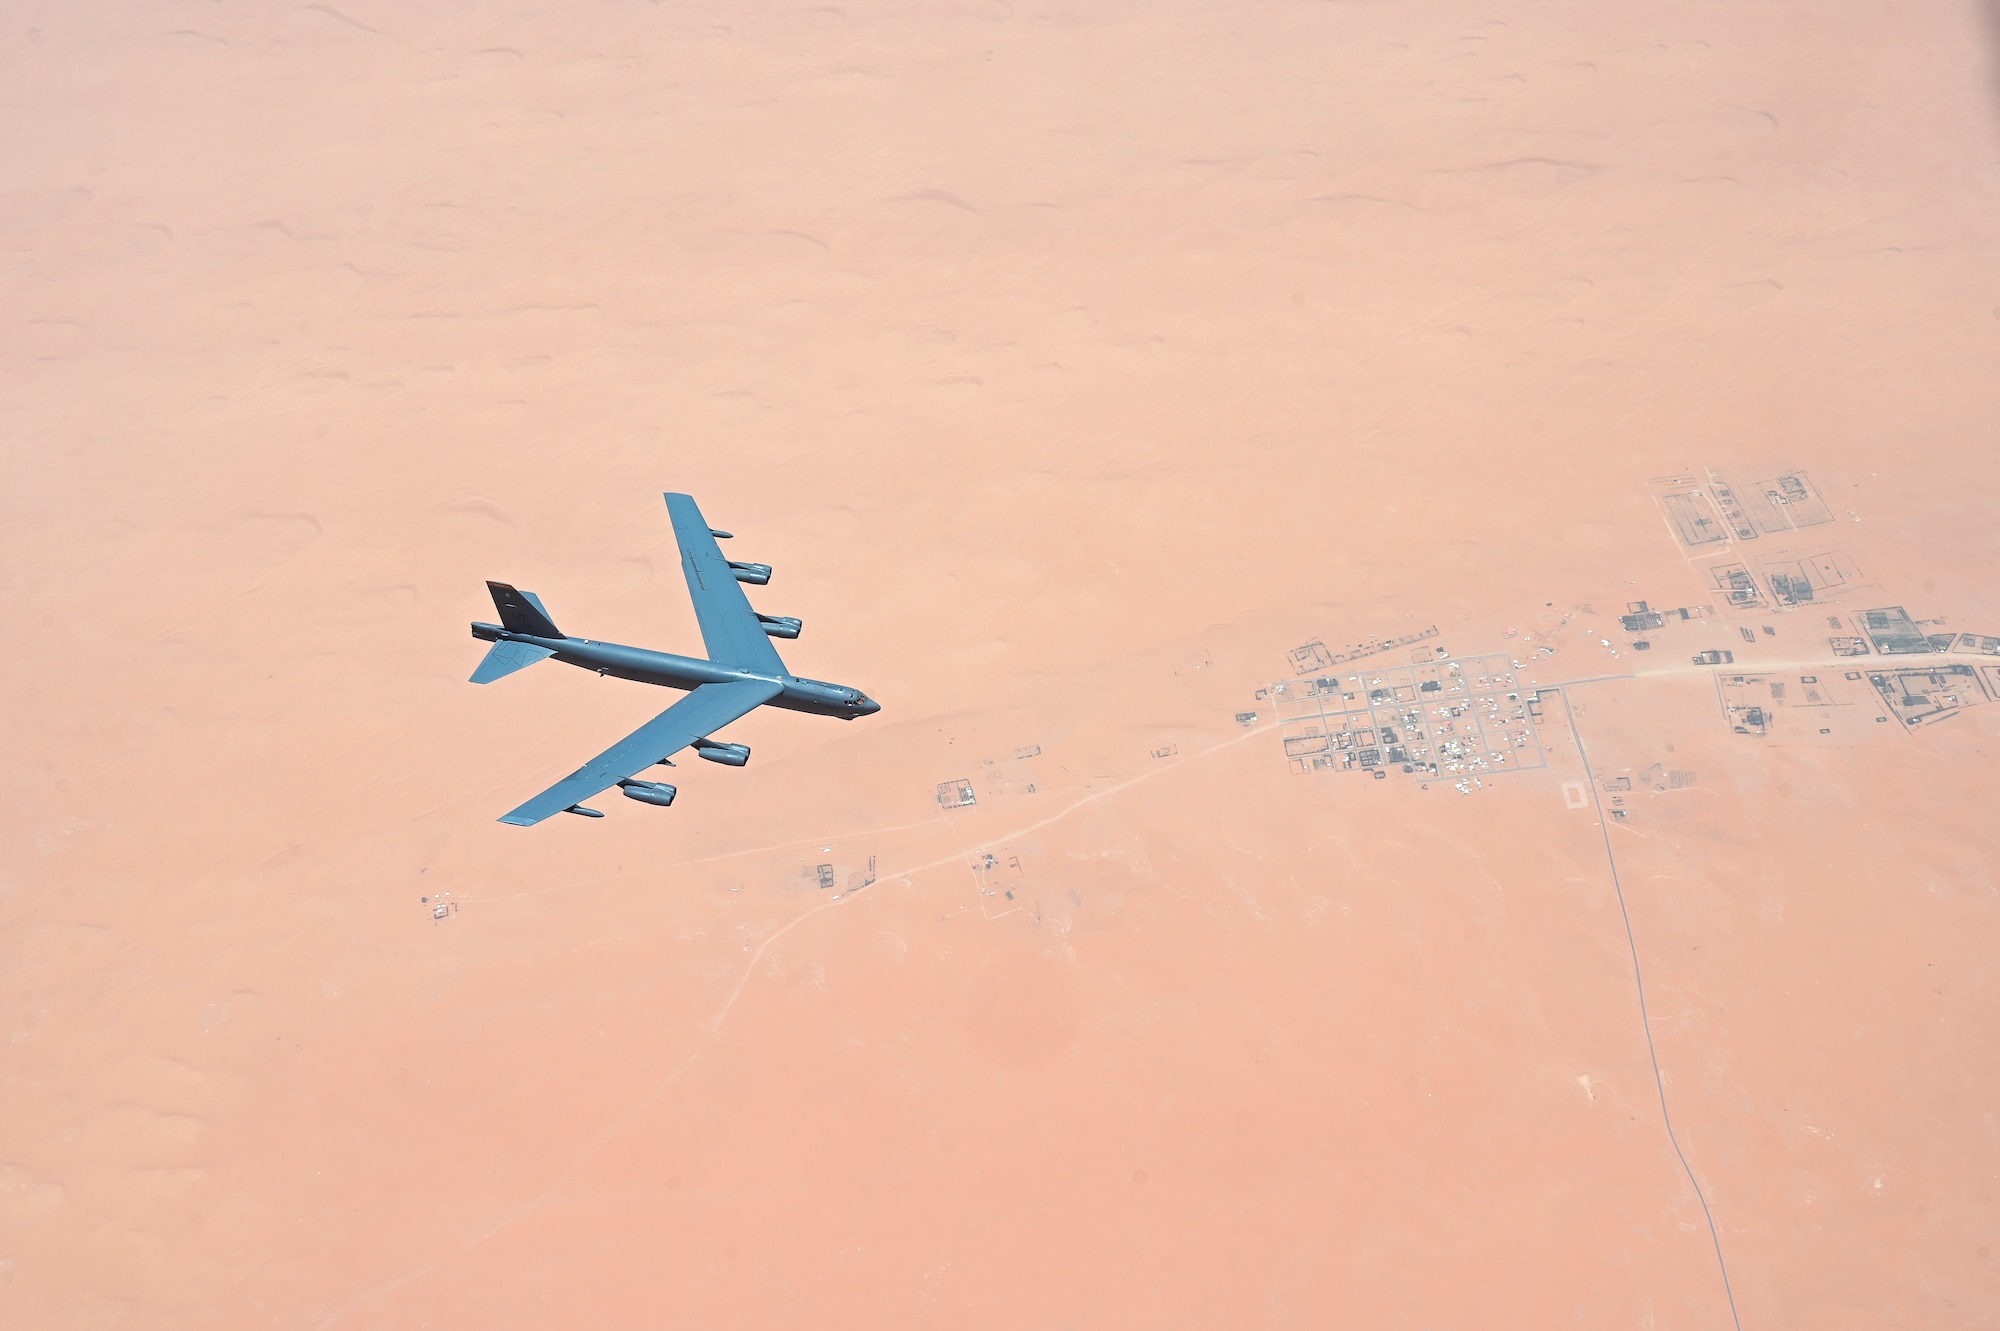 U.S. Air Force B-52 Stratofortress, assigned to the 5th Bomb Wing conducts a presence patrol mission with coalition and regional partners across the U.S. Central Command area of responsibility June 8, 2022. Presence patrol missions demonstrate the U.S.-led coalition’s commitment to promoting reginal stability. (U.S. Air Force photo by Staff Sgt. Ashley Sokolov)